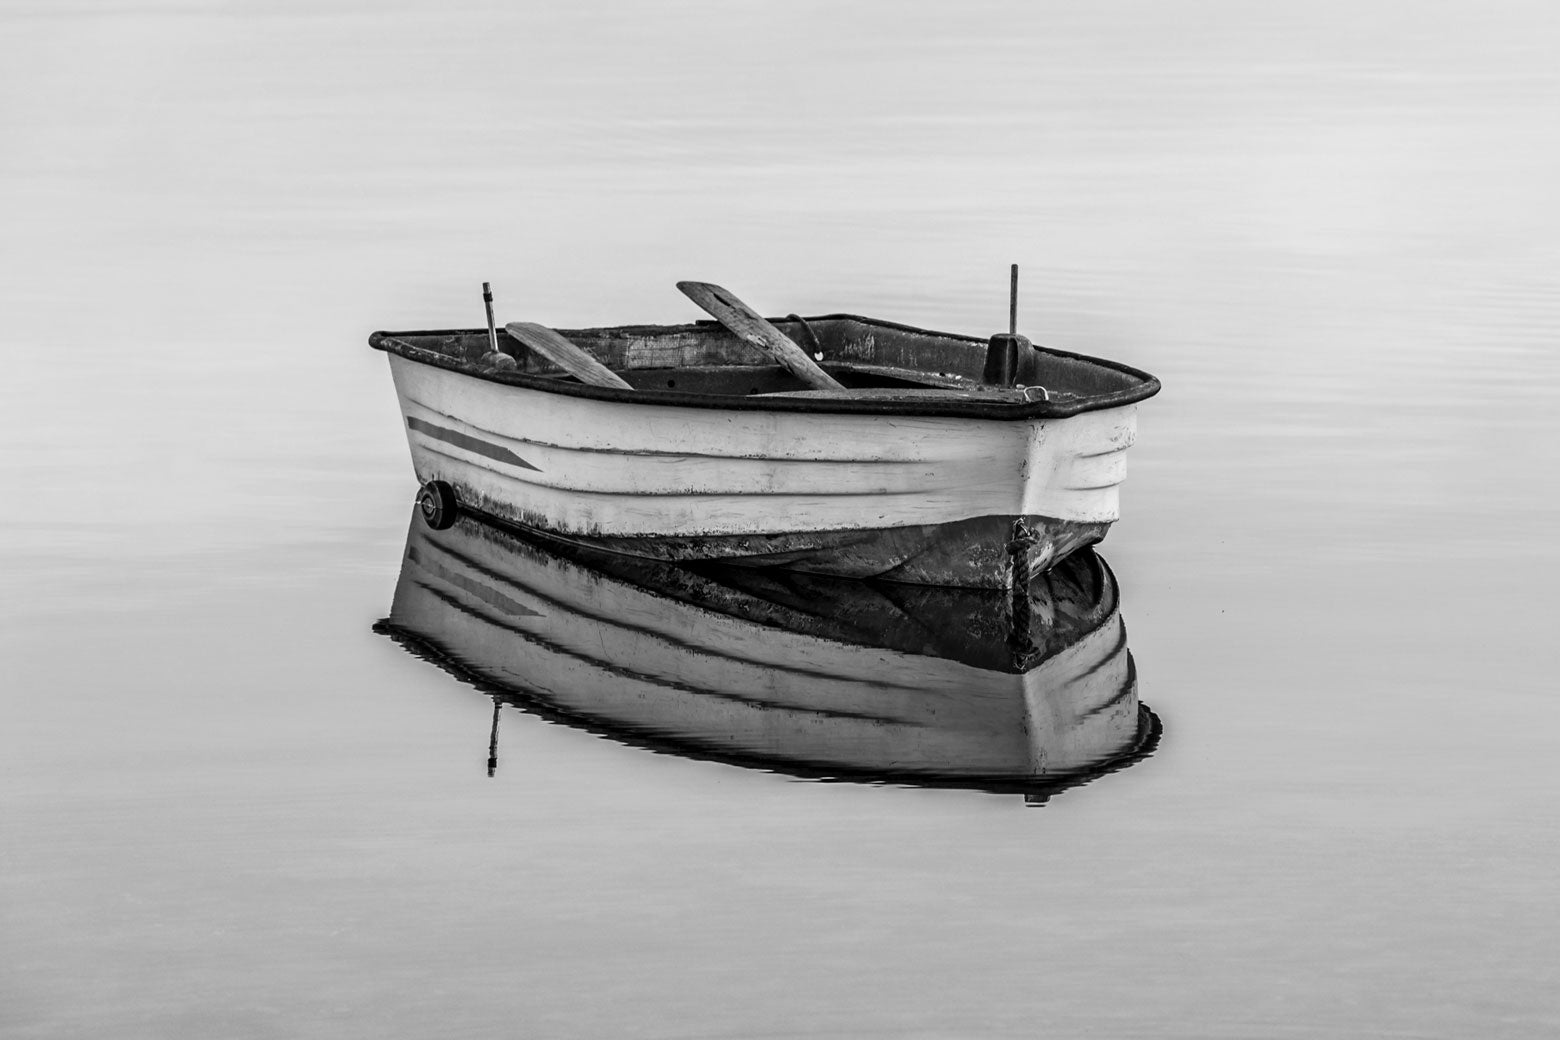 A row boat, in black and white.